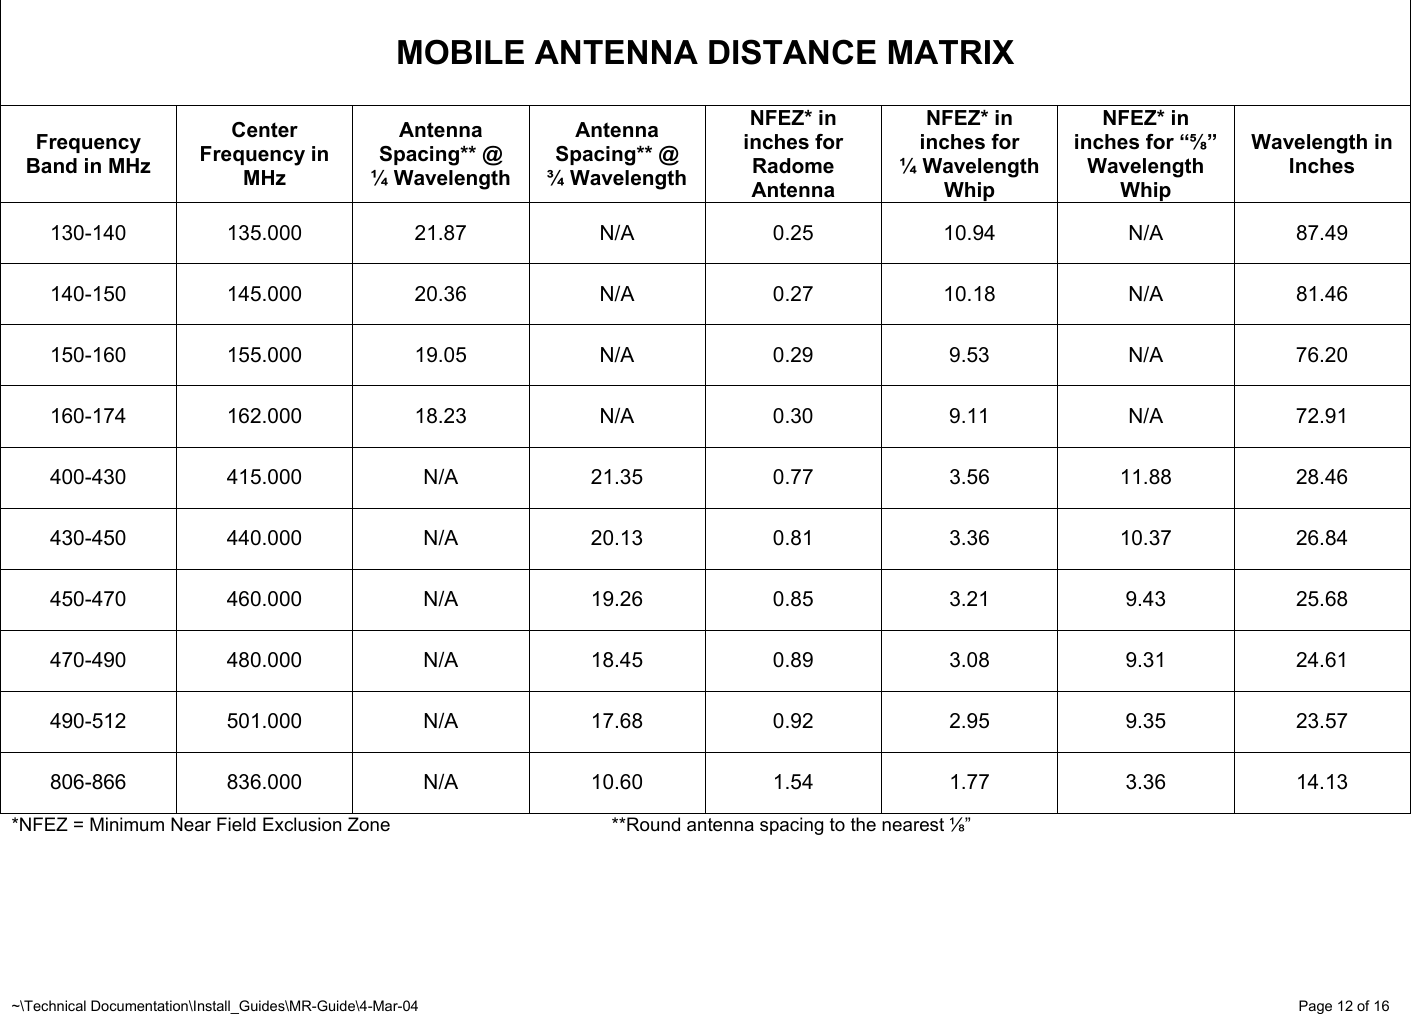 ~\Technical Documentation\Install_Guides\MR-Guide\4-Mar-04   Page 12 of 16    MOBILE ANTENNA DISTANCE MATRIX Frequency Band in MHz Center Frequency in MHz Antenna Spacing** @ ¼ Wavelength Antenna Spacing** @ ¾ Wavelength NFEZ* in inches for Radome Antenna NFEZ* in inches for  ¼ Wavelength Whip NFEZ* in inches for “⅝” Wavelength Whip Wavelength in Inches 130-140 135.000  21.87  N/A  0.25 10.94  N/A  87.49 140-150 145.000  20.36  N/A  0.27 10.18  N/A  81.46 150-160 155.000  19.05  N/A  0.29  9.53  N/A  76.20 160-174 162.000  18.23  N/A  0.30  9.11  N/A  72.91 400-430 415.000  N/A  21.35  0.77 3.56 11.88 28.46 430-450 440.000  N/A  20.13  0.81 3.36 10.37 26.84 450-470 460.000  N/A  19.26  0.85 3.21 9.43 25.68 470-490 480.000  N/A  18.45  0.89 3.08 9.31 24.61 490-512 501.000  N/A  17.68  0.92 2.95 9.35 23.57 806-866 836.000  N/A  10.60  1.54 1.77 3.36 14.13 *NFEZ = Minimum Near Field Exclusion Zone       **Round antenna spacing to the nearest ⅛” 